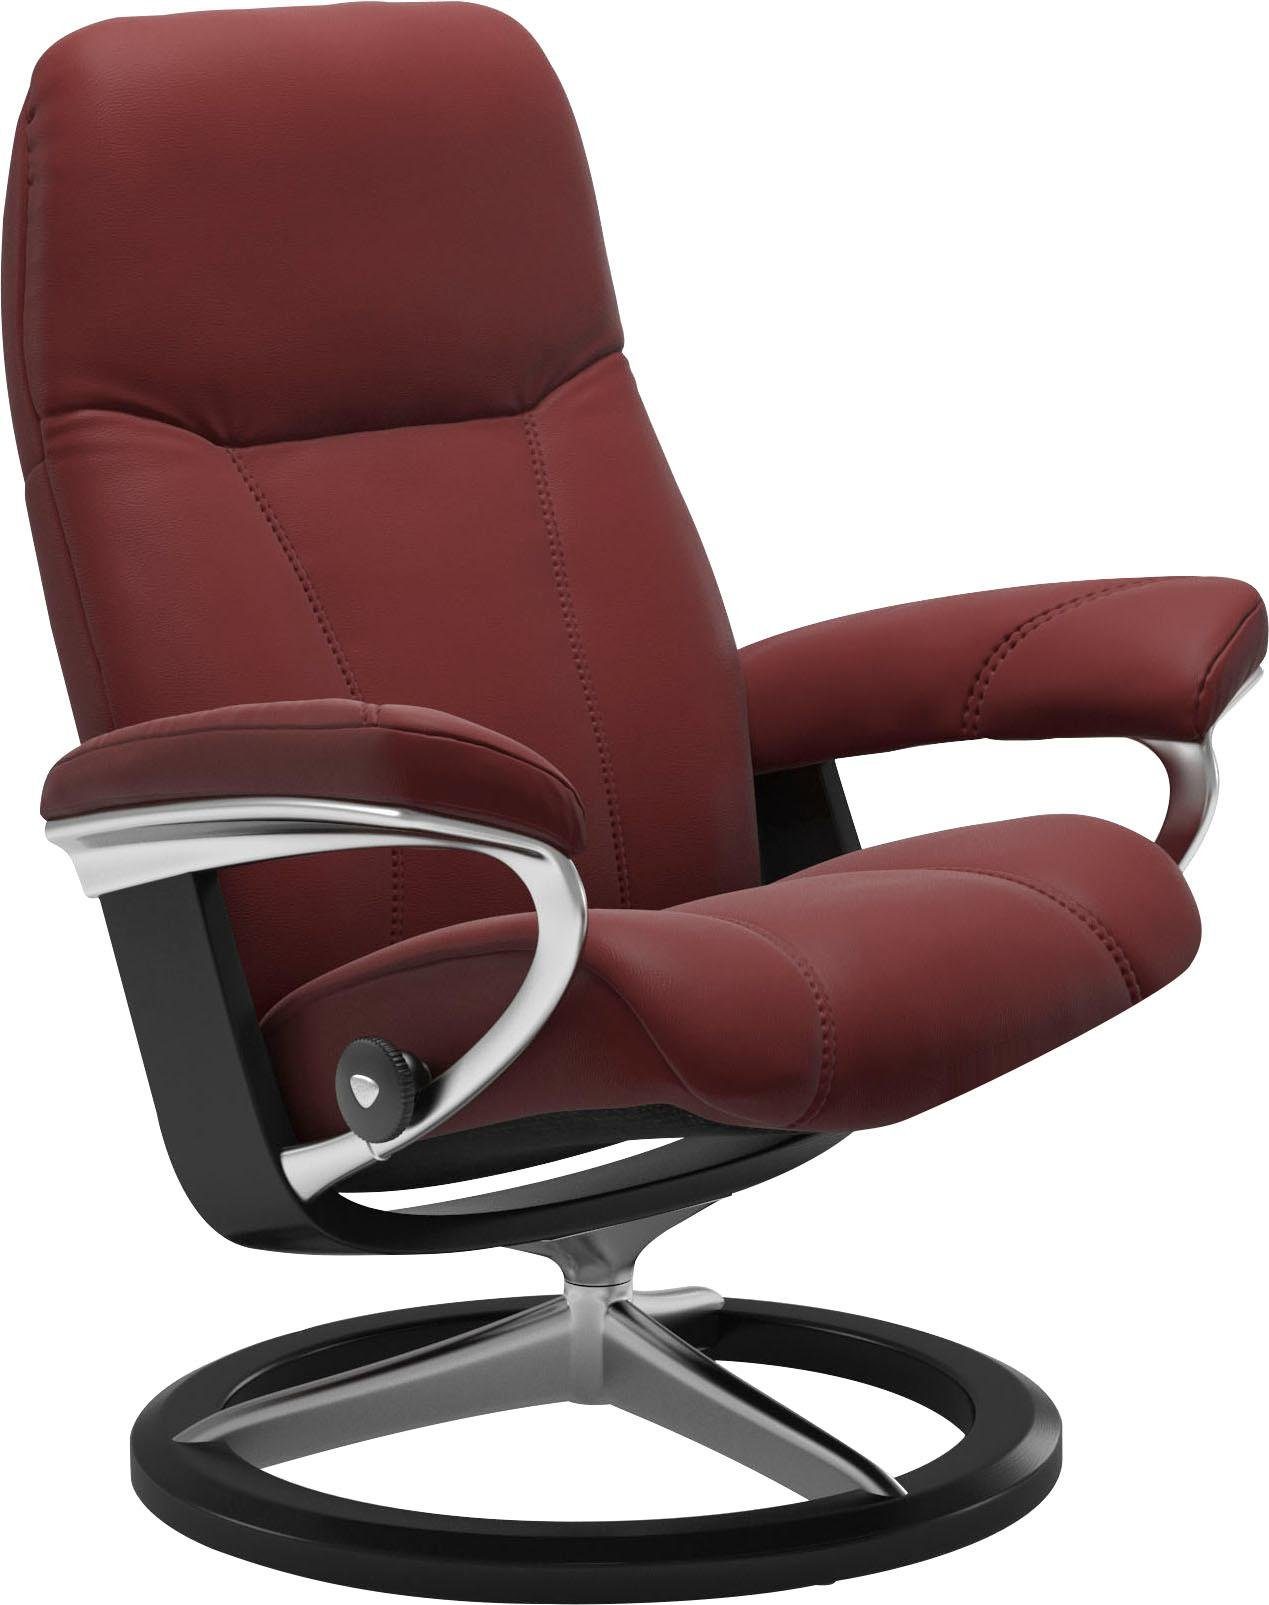 Outlet-Store Stressless® Relaxsessel Consul, mit Signature Gestell Base, S, Größe Schwarz